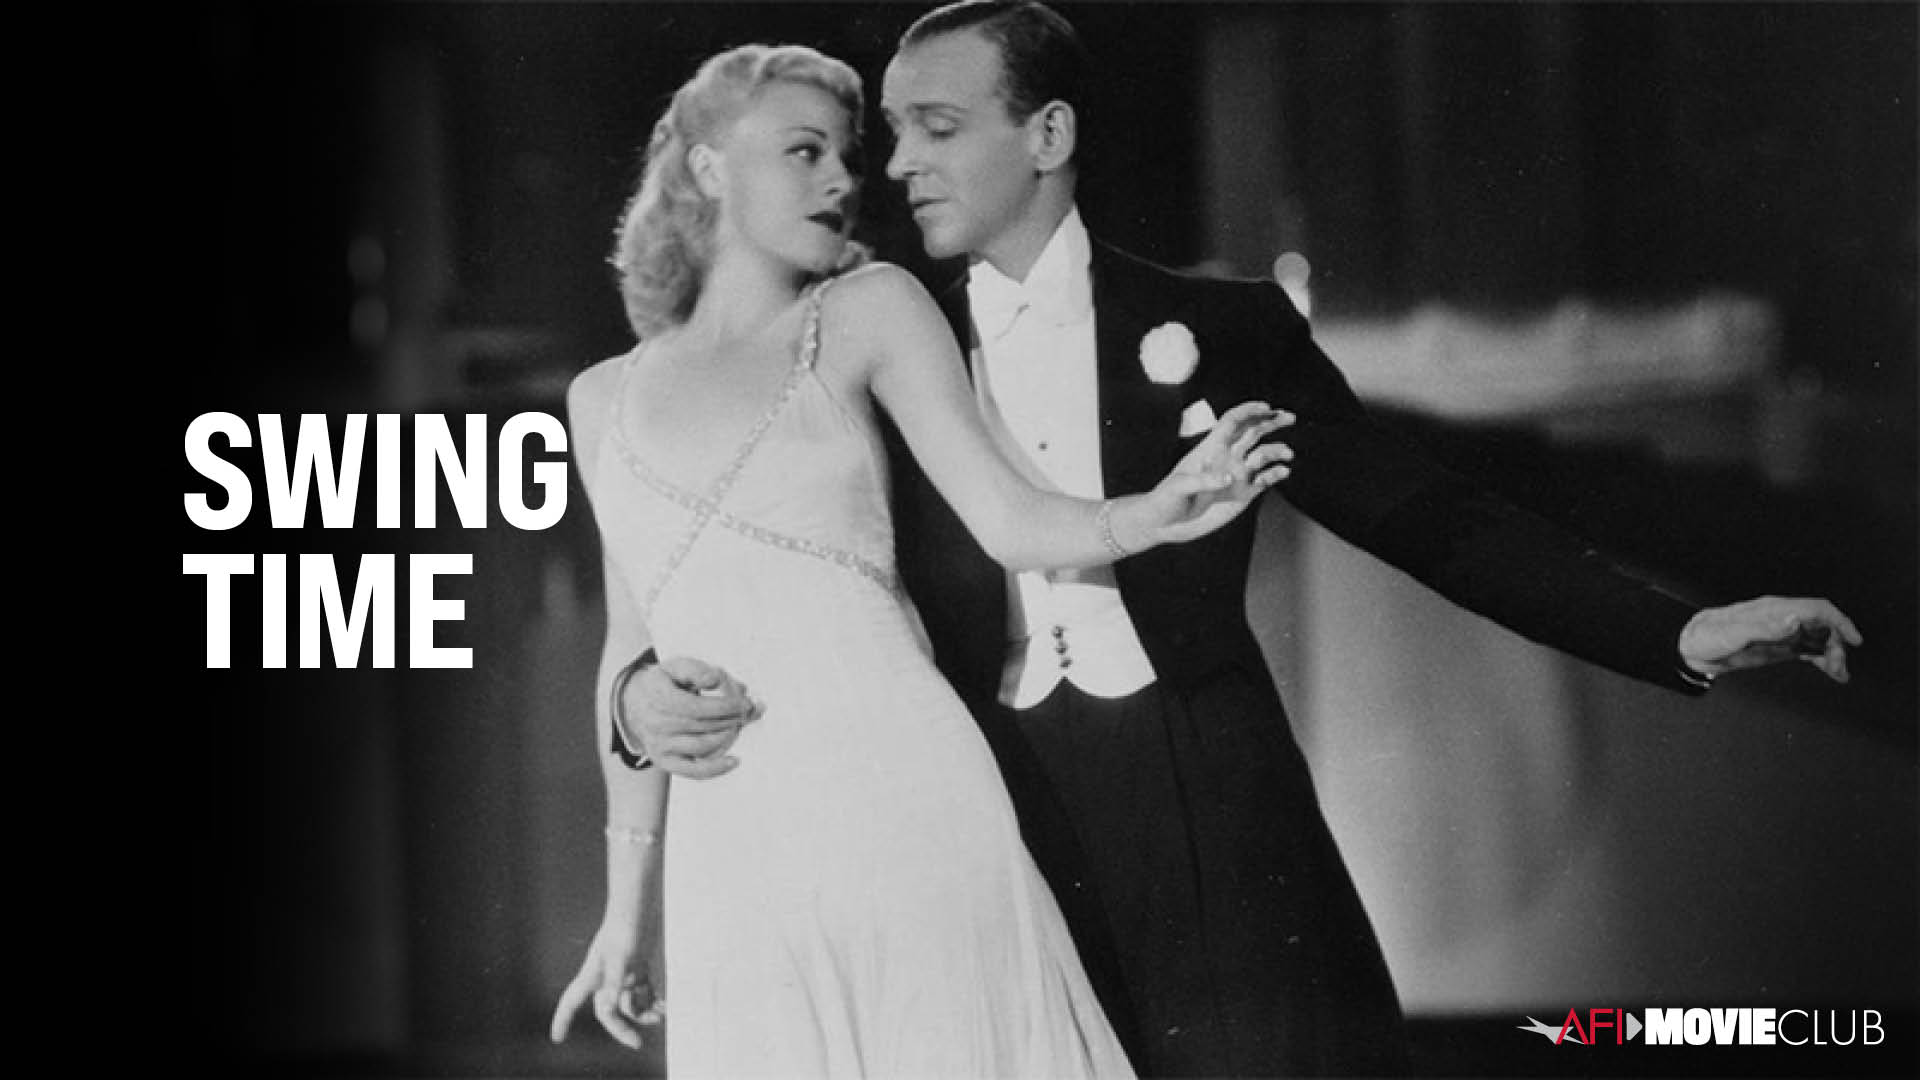 Swing Time Film Still - Fred Astaire and Ginger Rogers